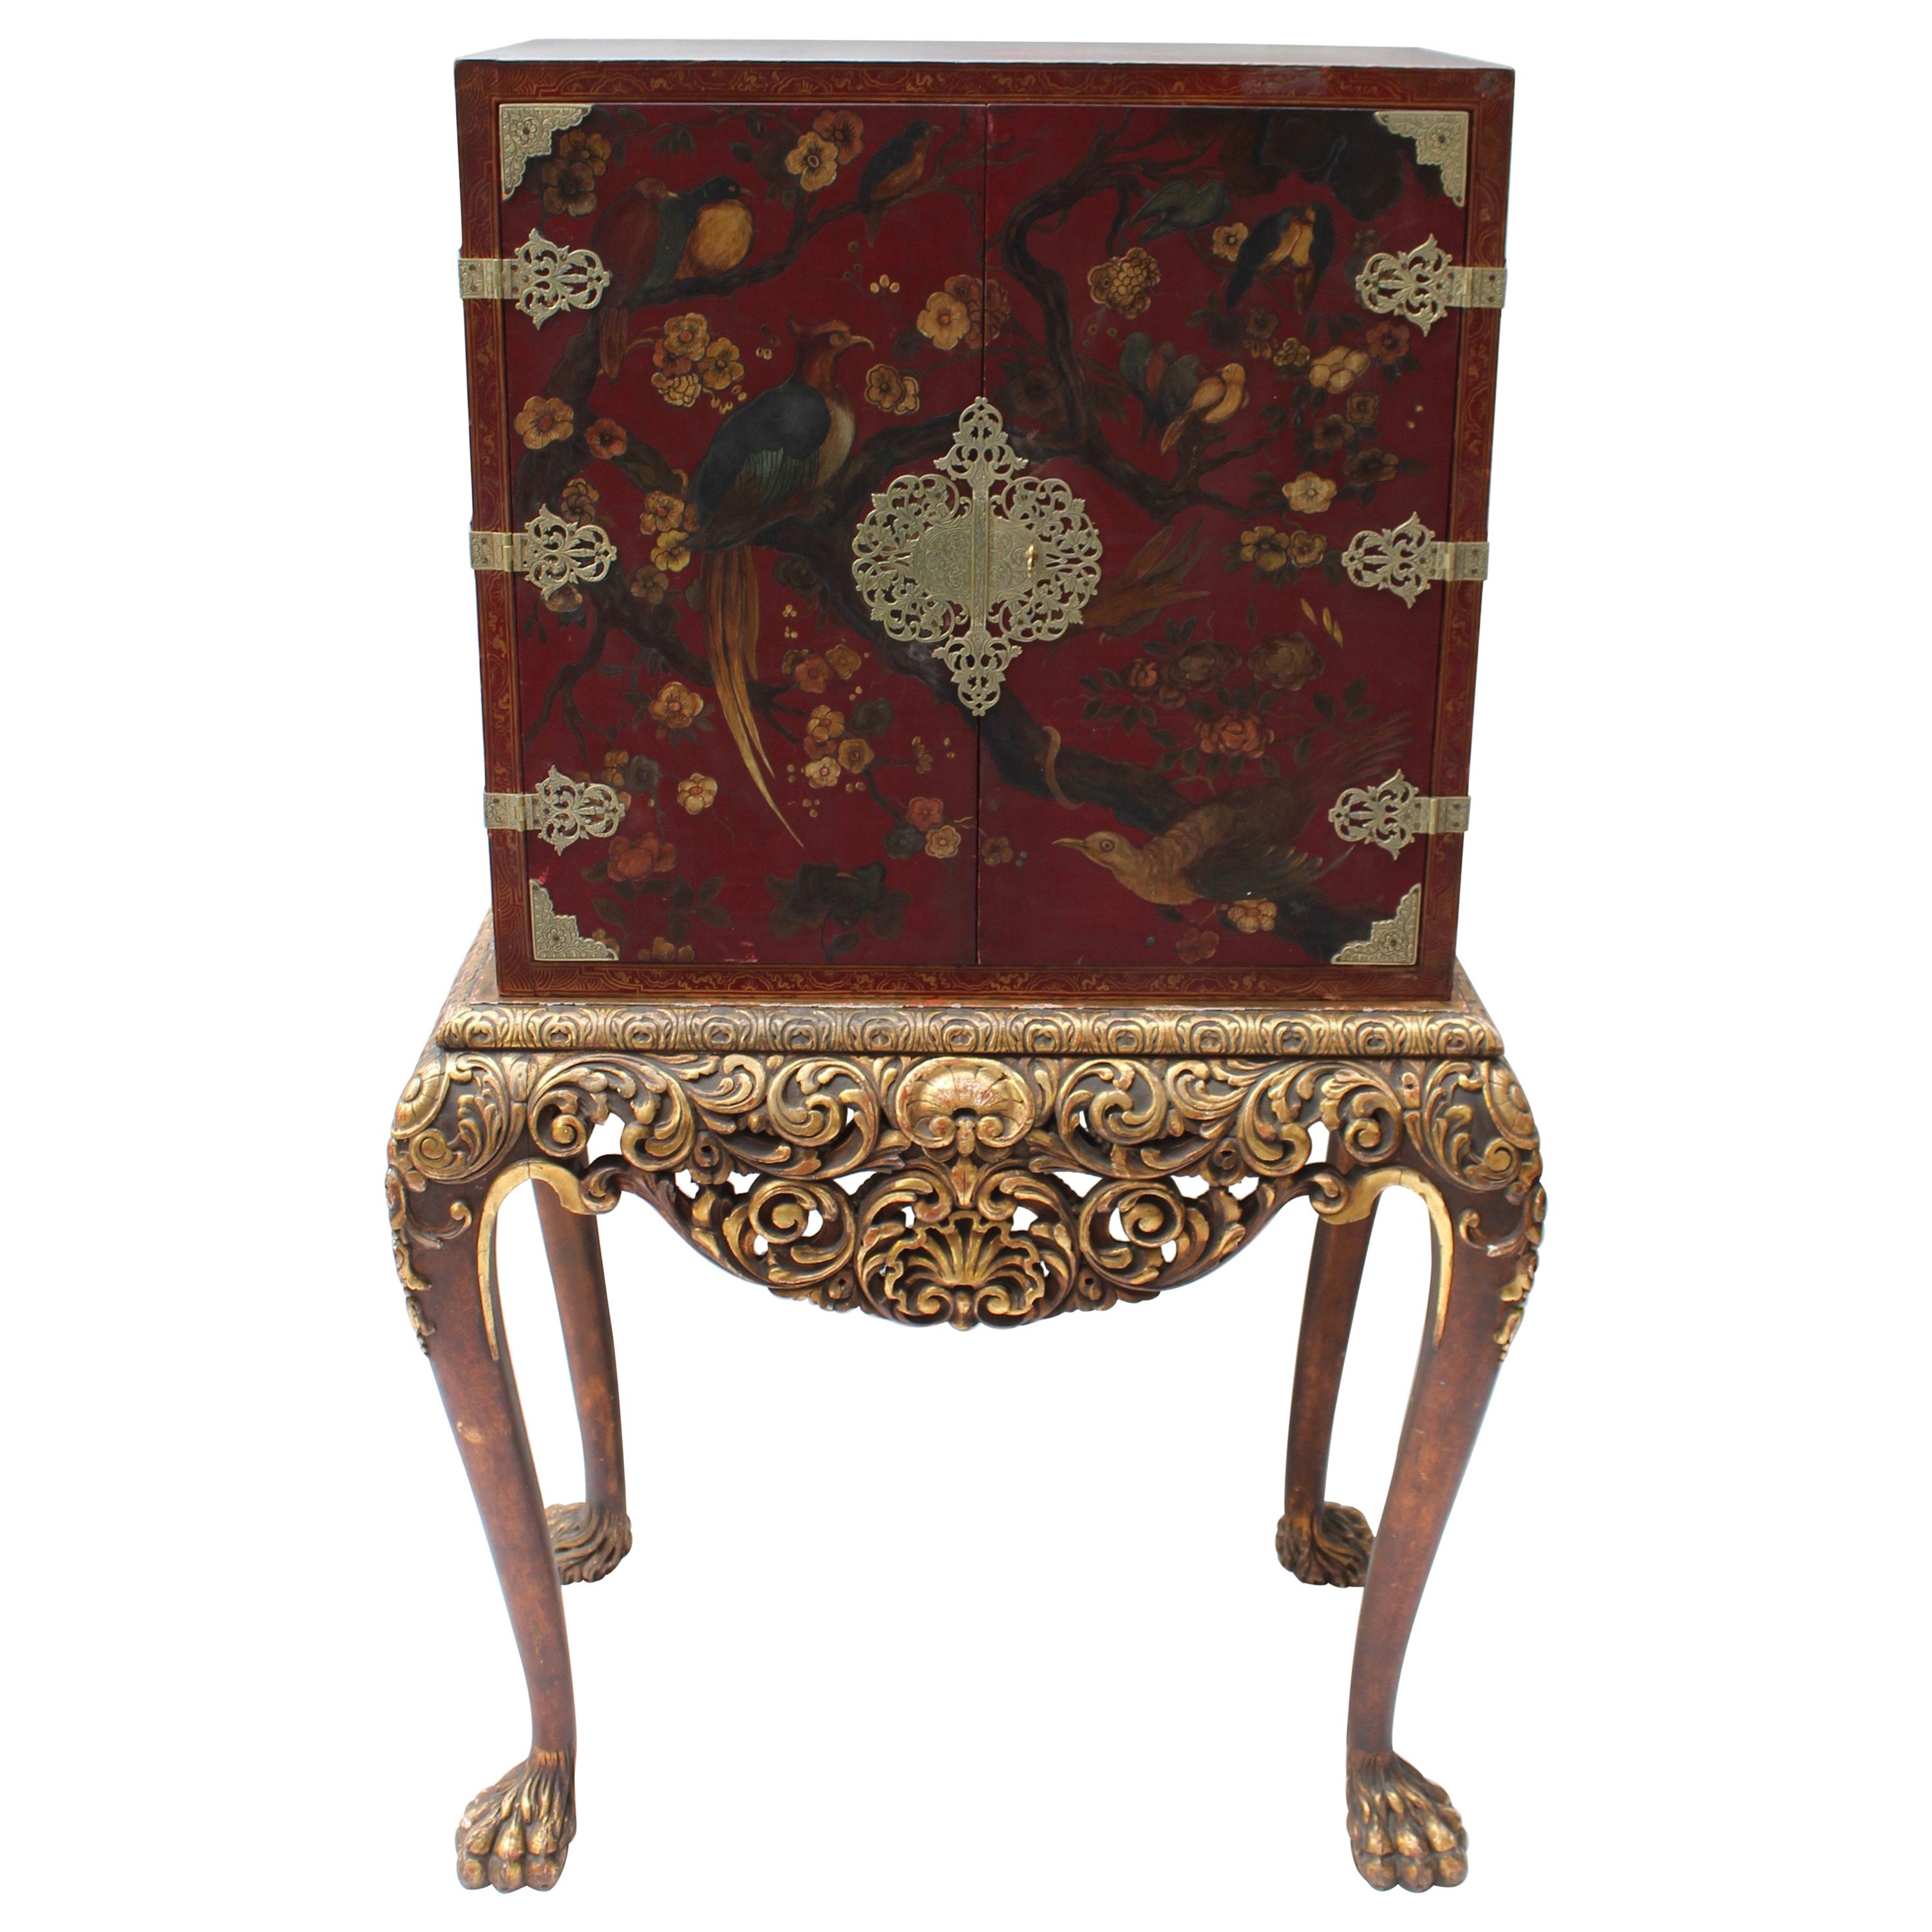 Chinoiserie Cabinet on Stand